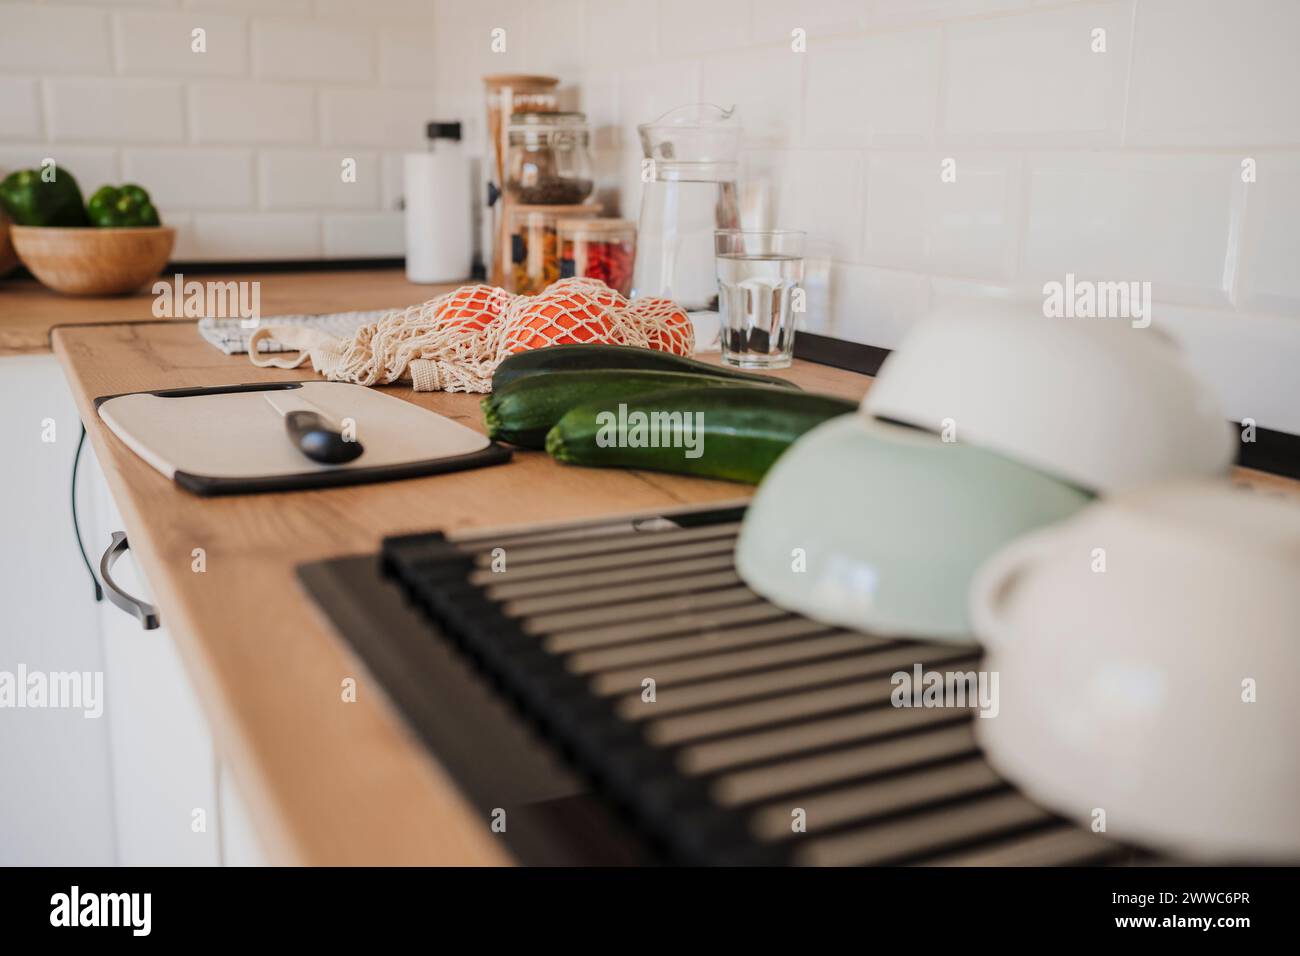 Modern kitchen counter with various food near cutting board and utensils Stock Photo